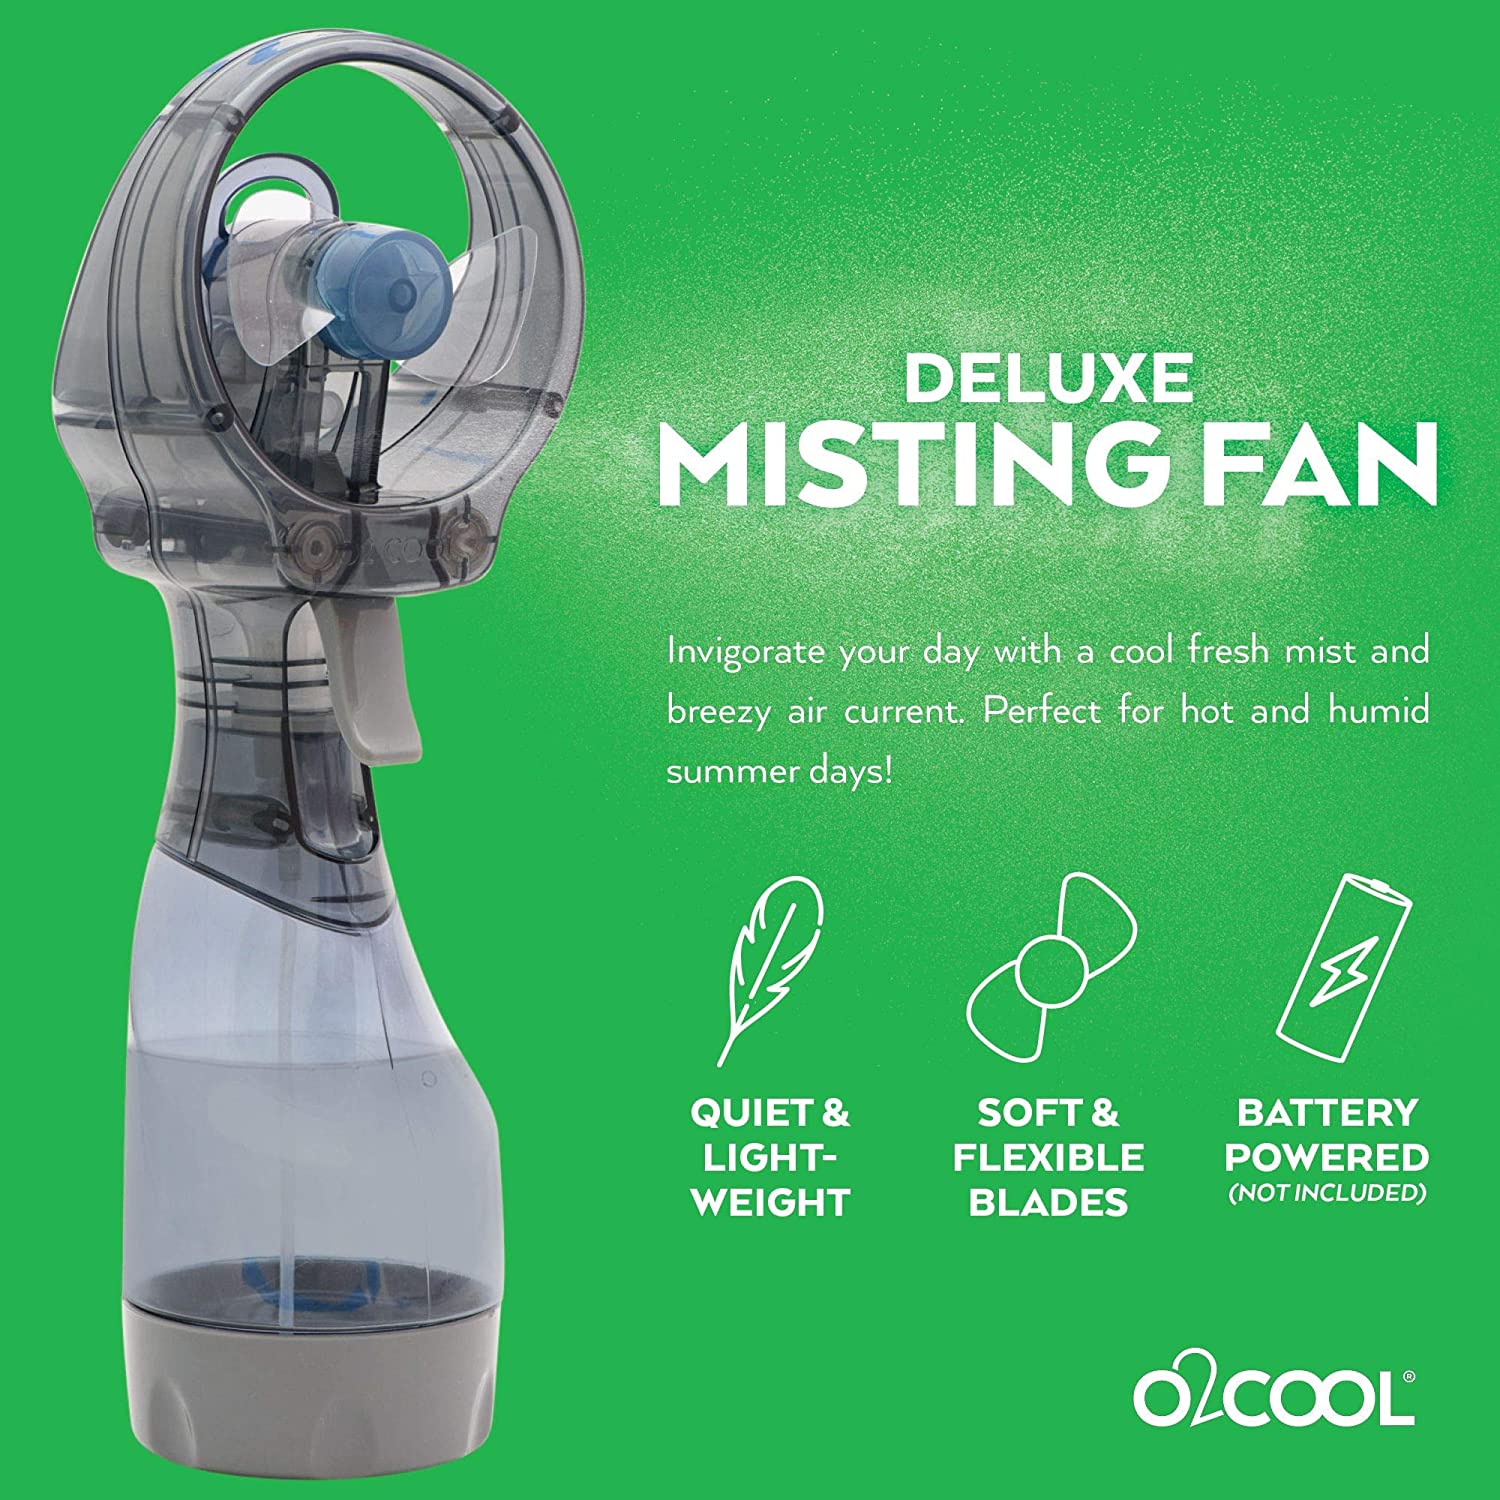 O2COOL Deluxe Misting Handheld Portable Misting Fan, Grey